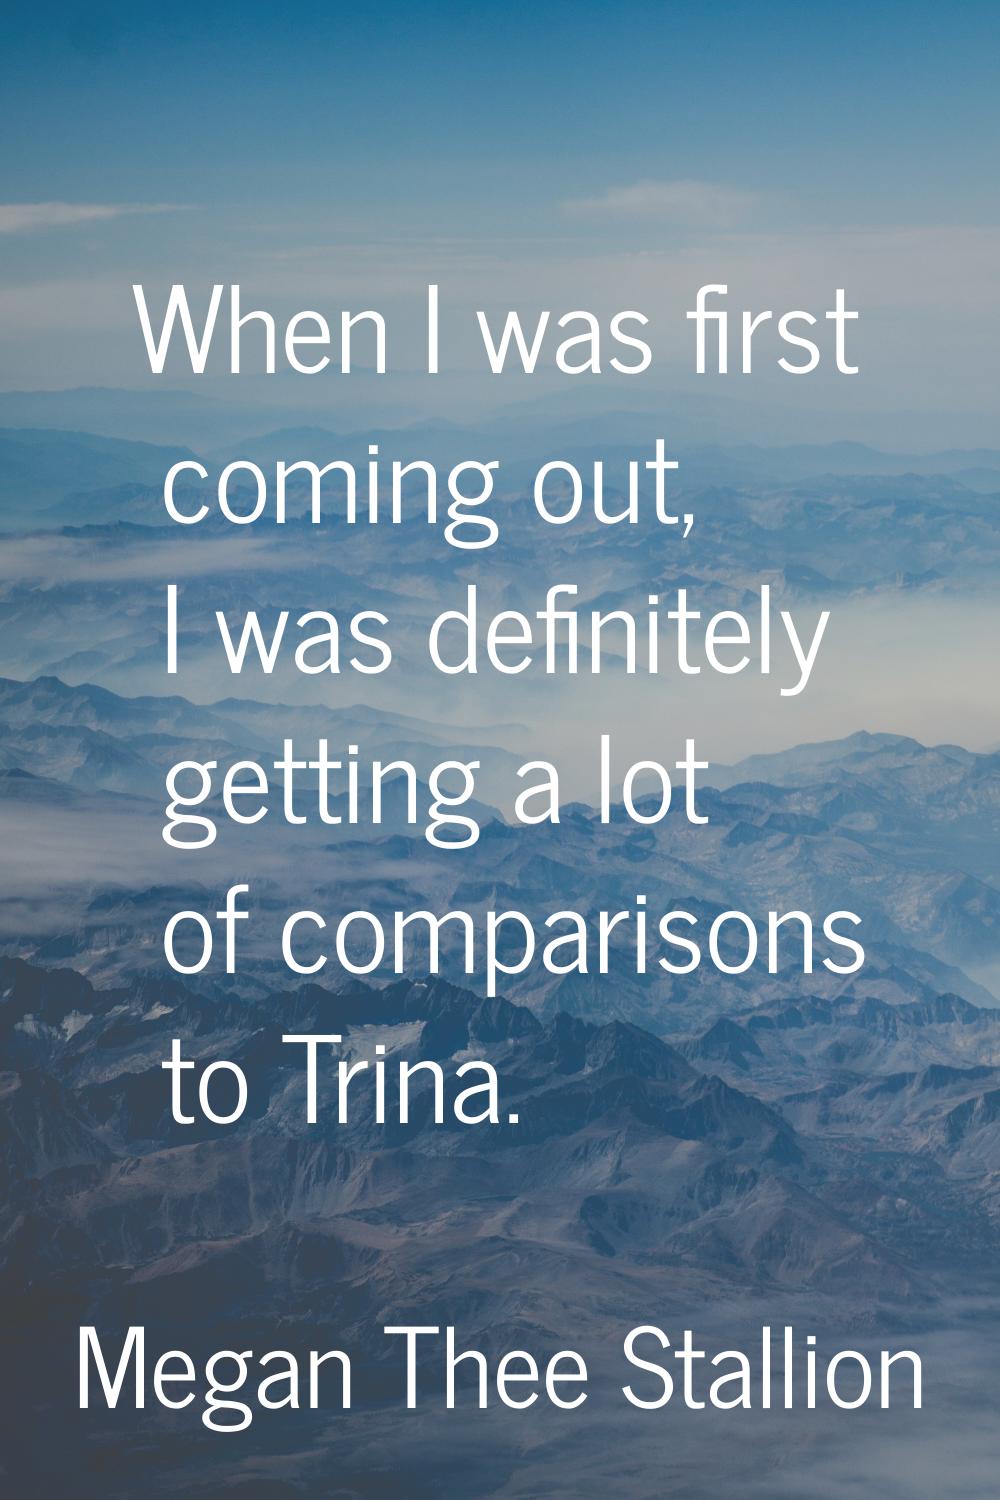 When I was first coming out, I was definitely getting a lot of comparisons to Trina.